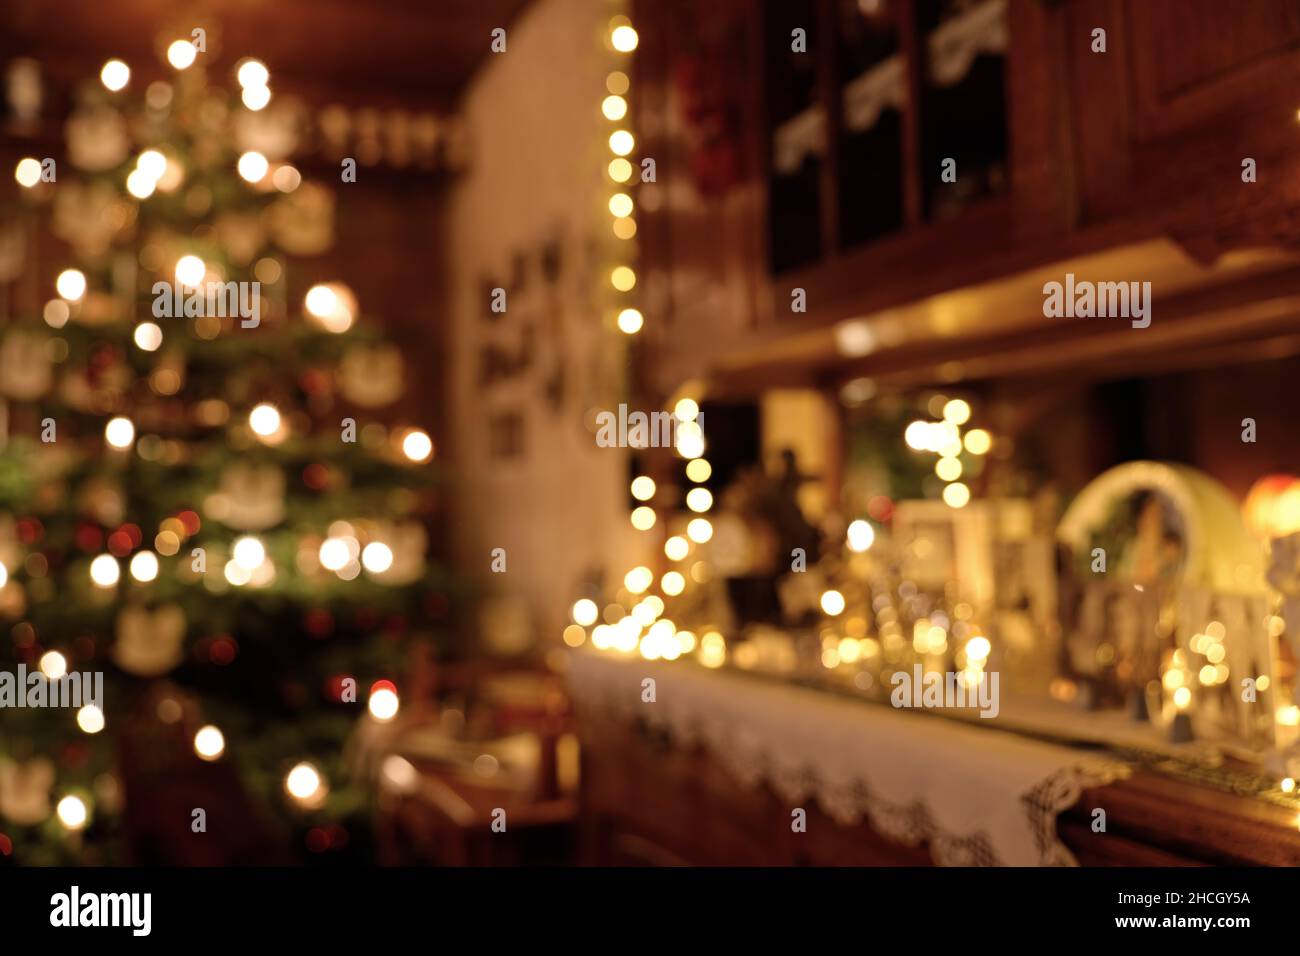 Blurred Section of Living Room Christmas Decoration with Christmas Tree Stock Photo